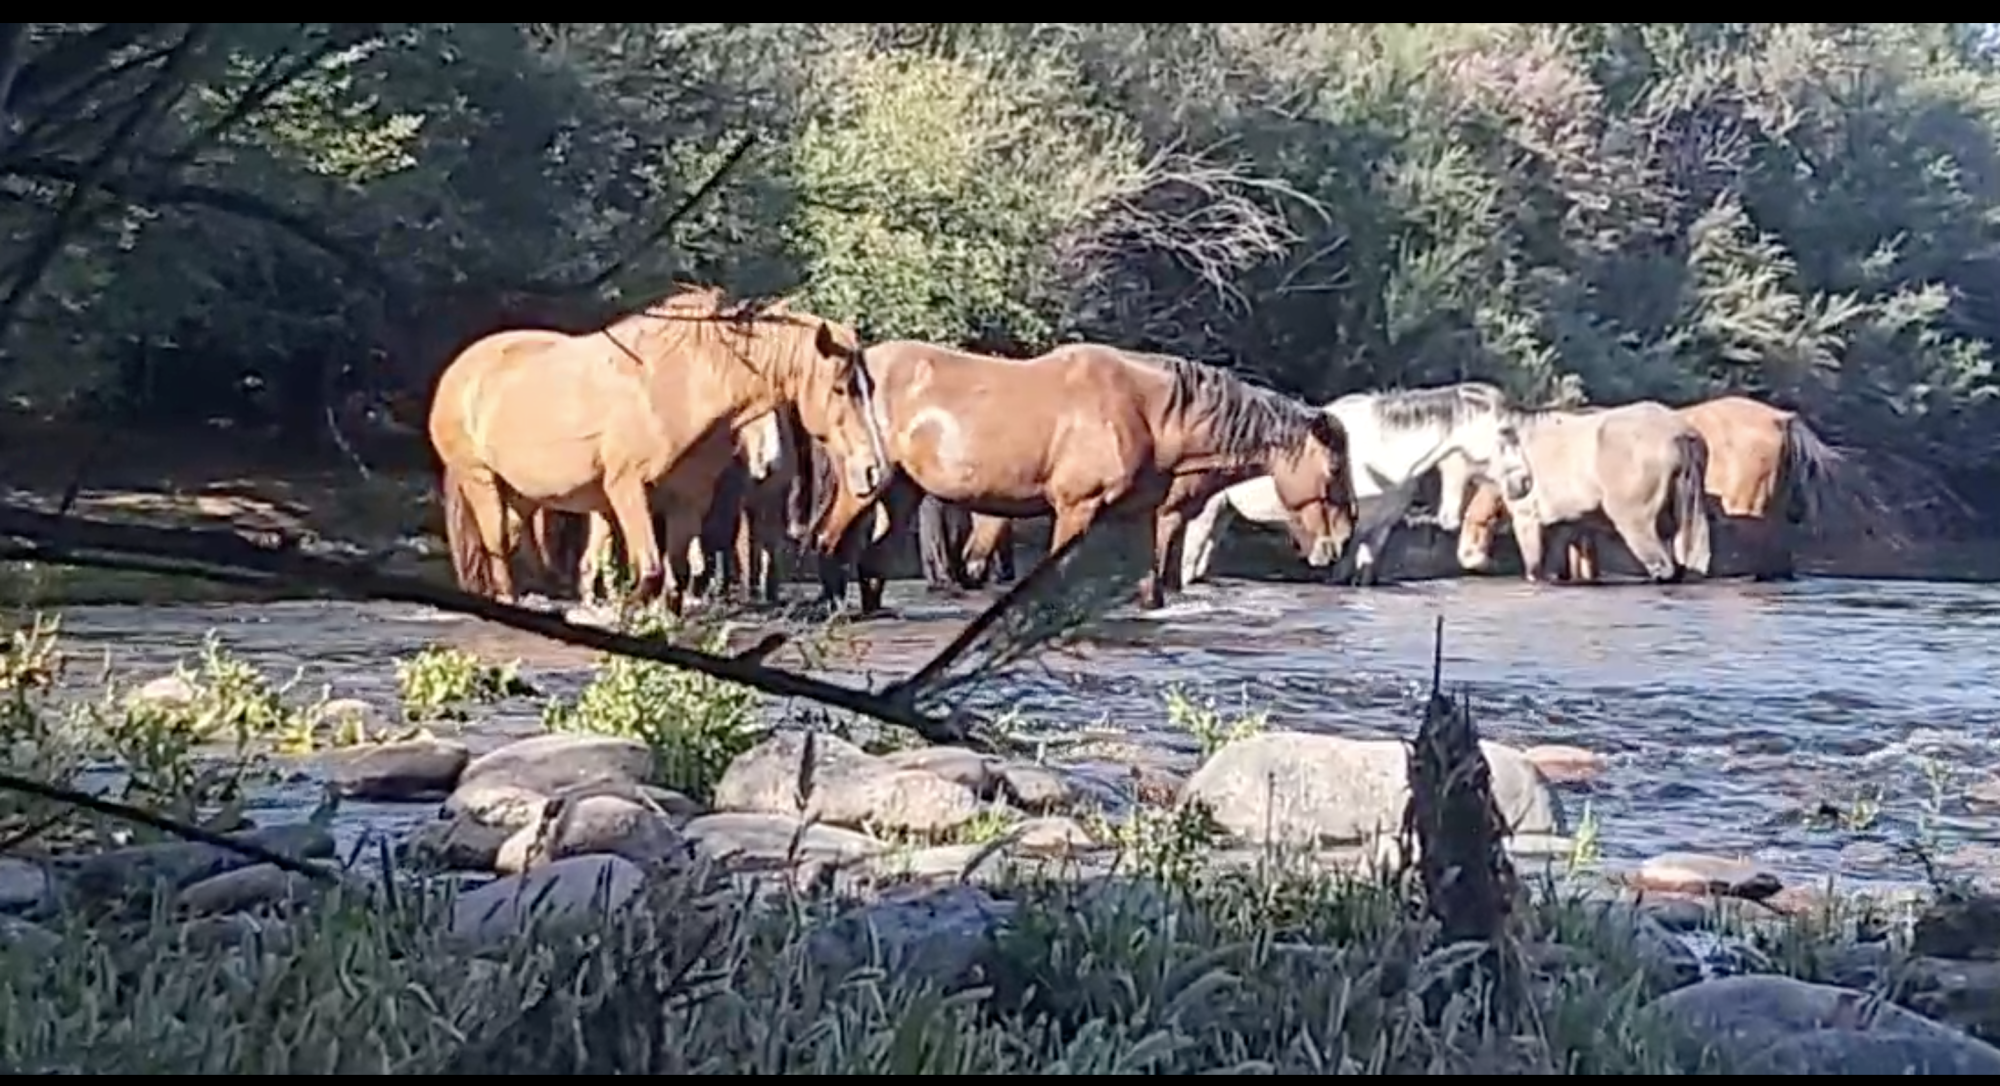 Beautiful Salt River wild horses resting in the water.